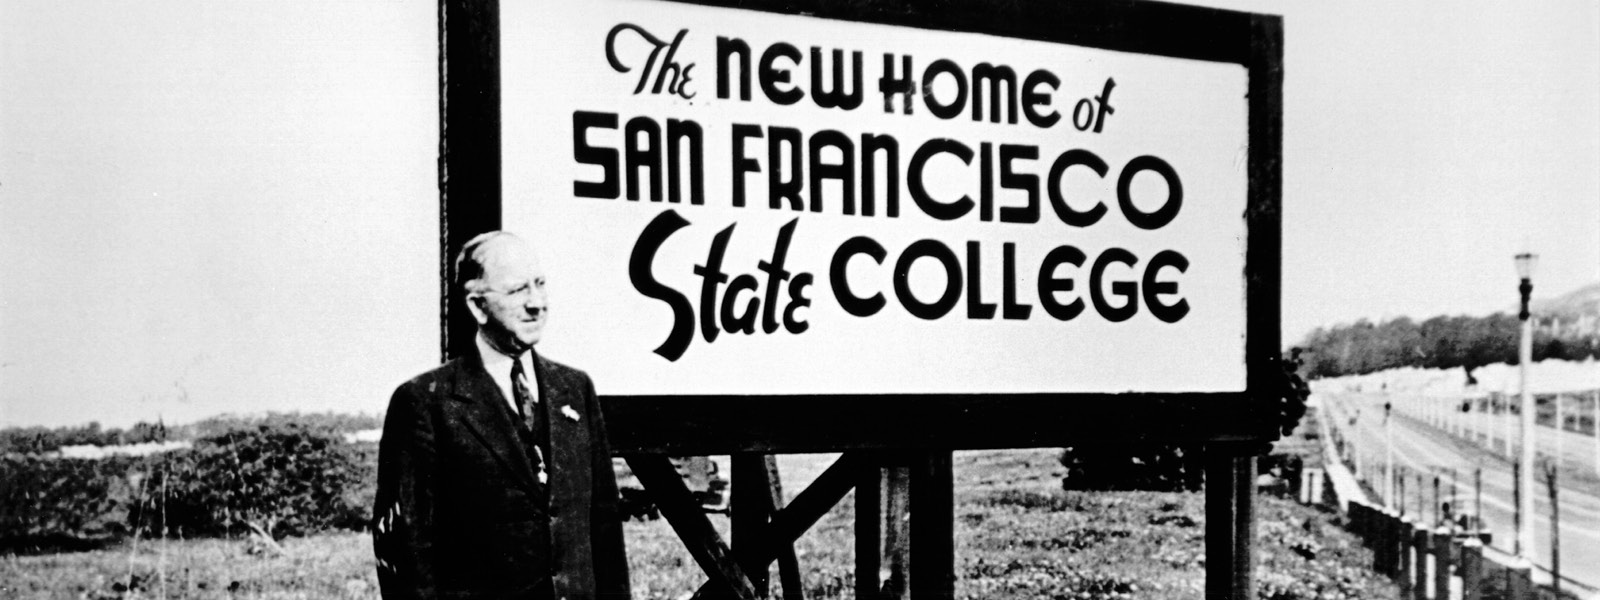 historic photo with a sign that reads 'The New Home of SF State College"